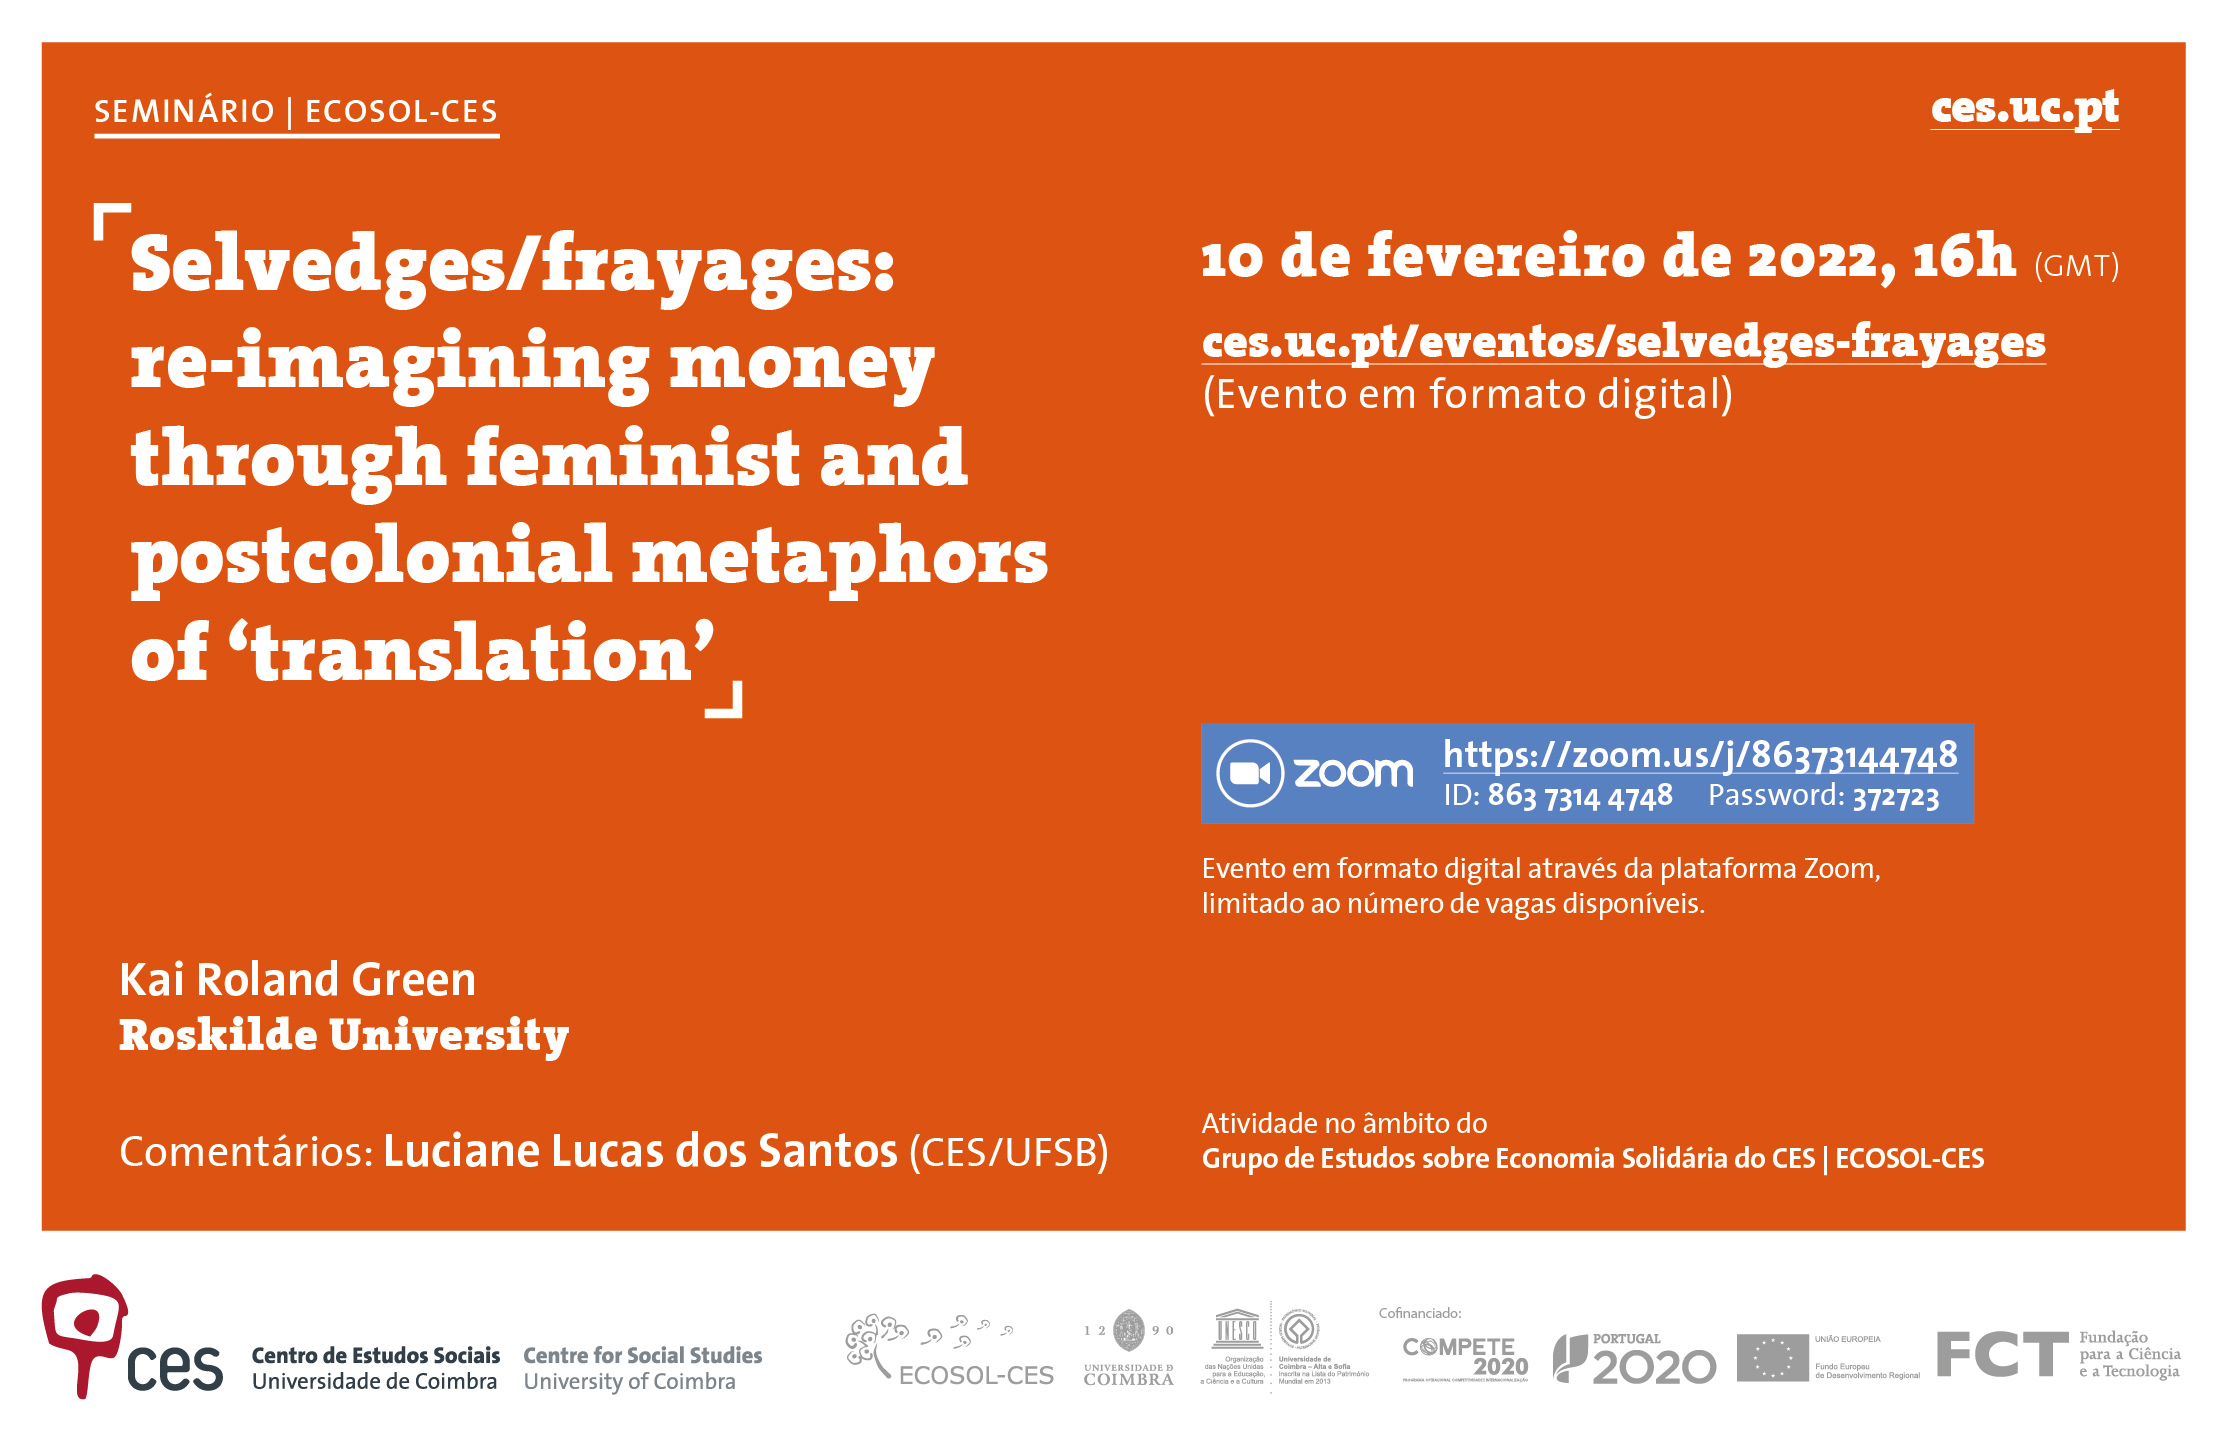 Selvedges/frayages: re-imagining money through feminist and postcolonial metaphors of ‘translation’<span id="edit_37166"><script>$(function() { $('#edit_37166').load( "/myces/user/editobj.php?tipo=evento&id=37166" ); });</script></span>